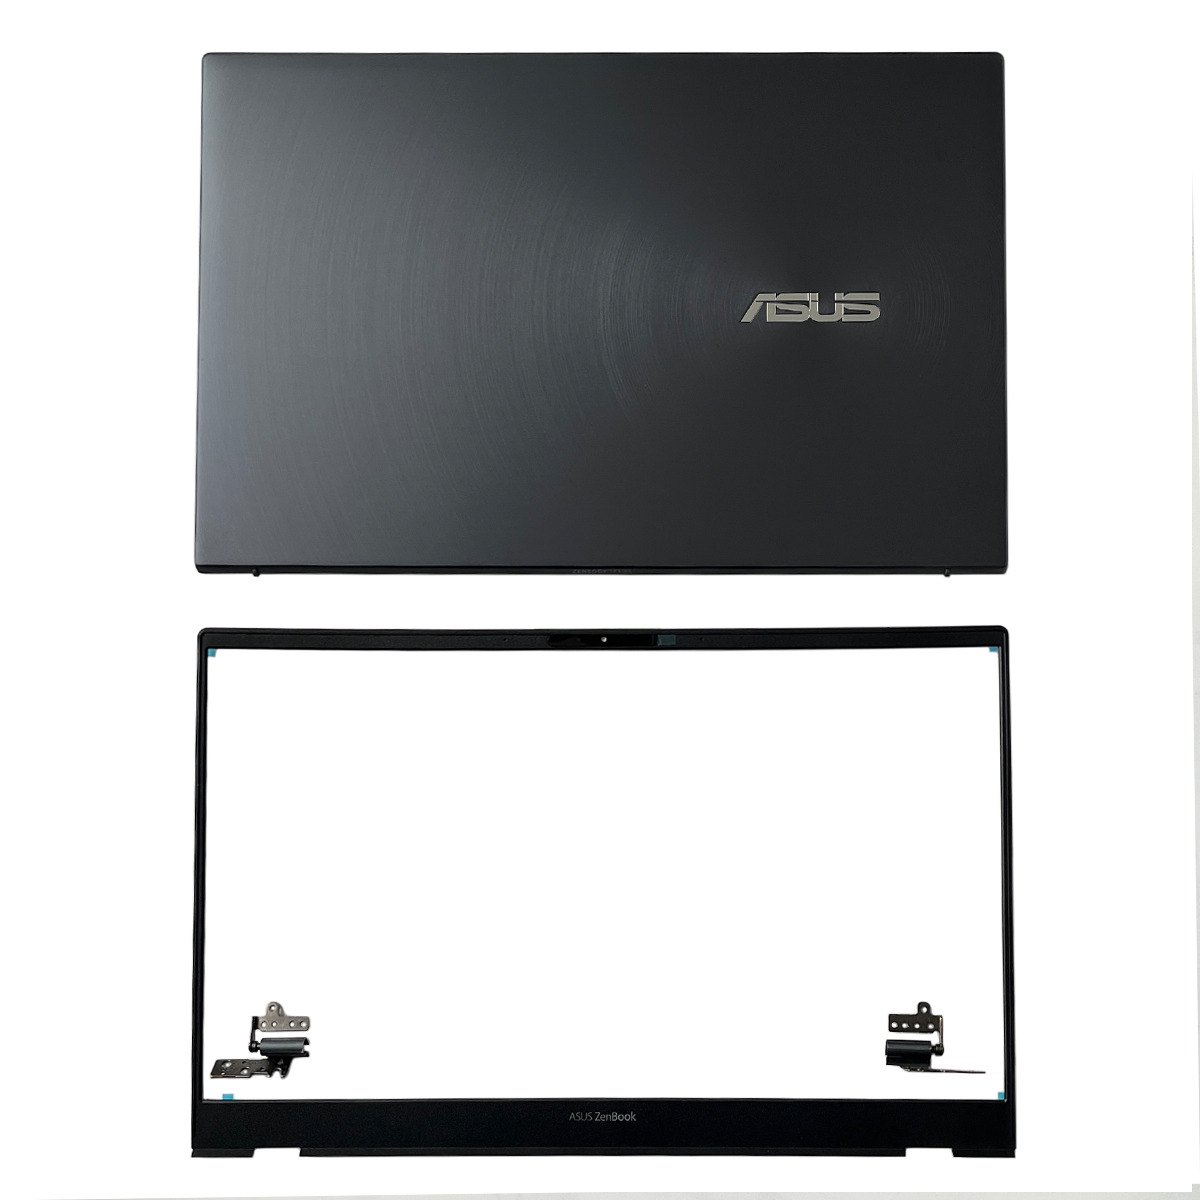 New for Asus Zenbook 14 Q408UG UX425U UX425E LCD Back Cover Bezel with hinges